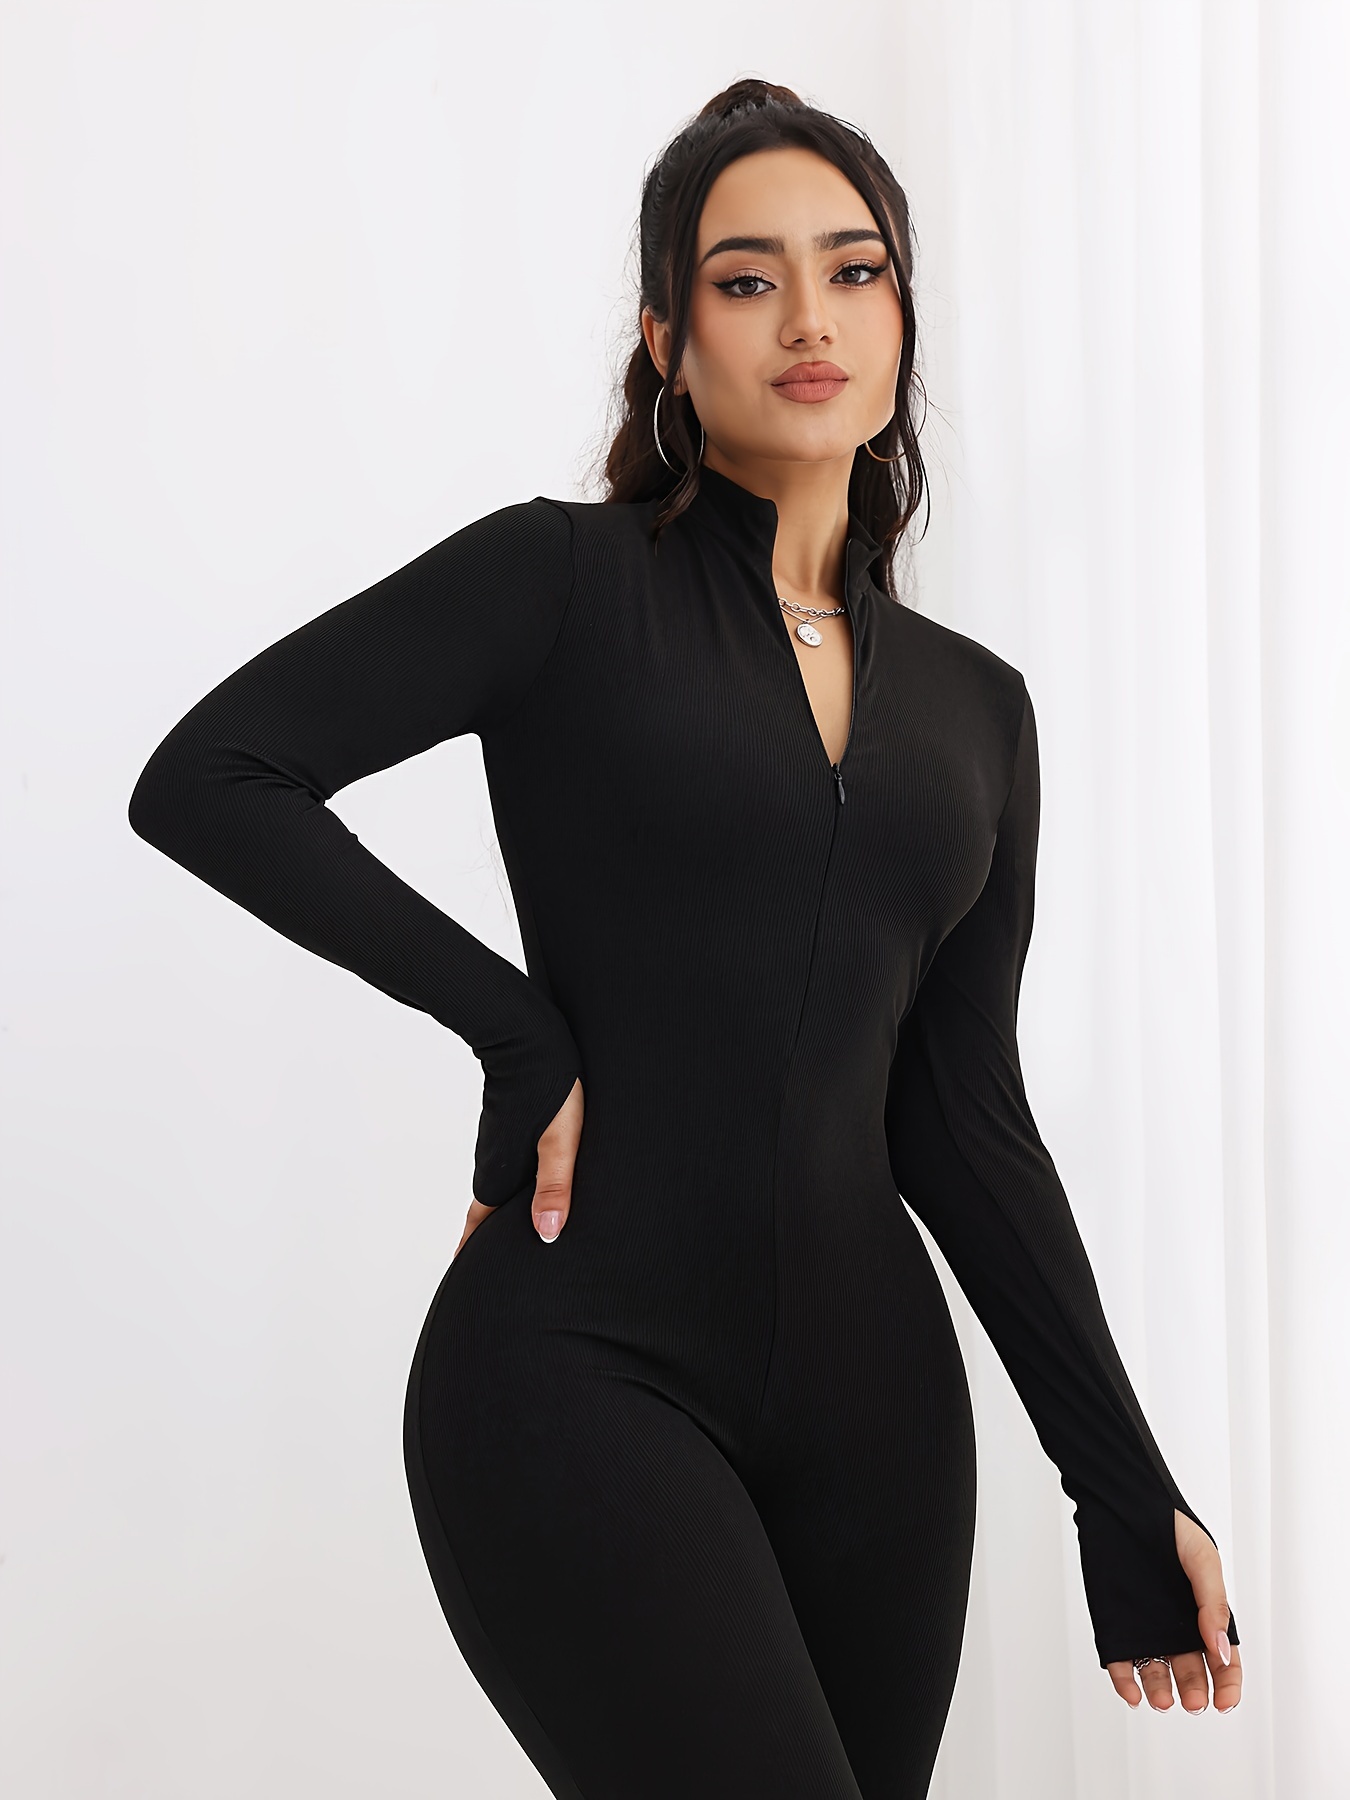 Women Pants Suits Formal Women's Yoga Sets Tight-Fitting Solid Color  Long-Sleeved Leisure Yoga Spring (Black-`, XL), Black-`, X-Large